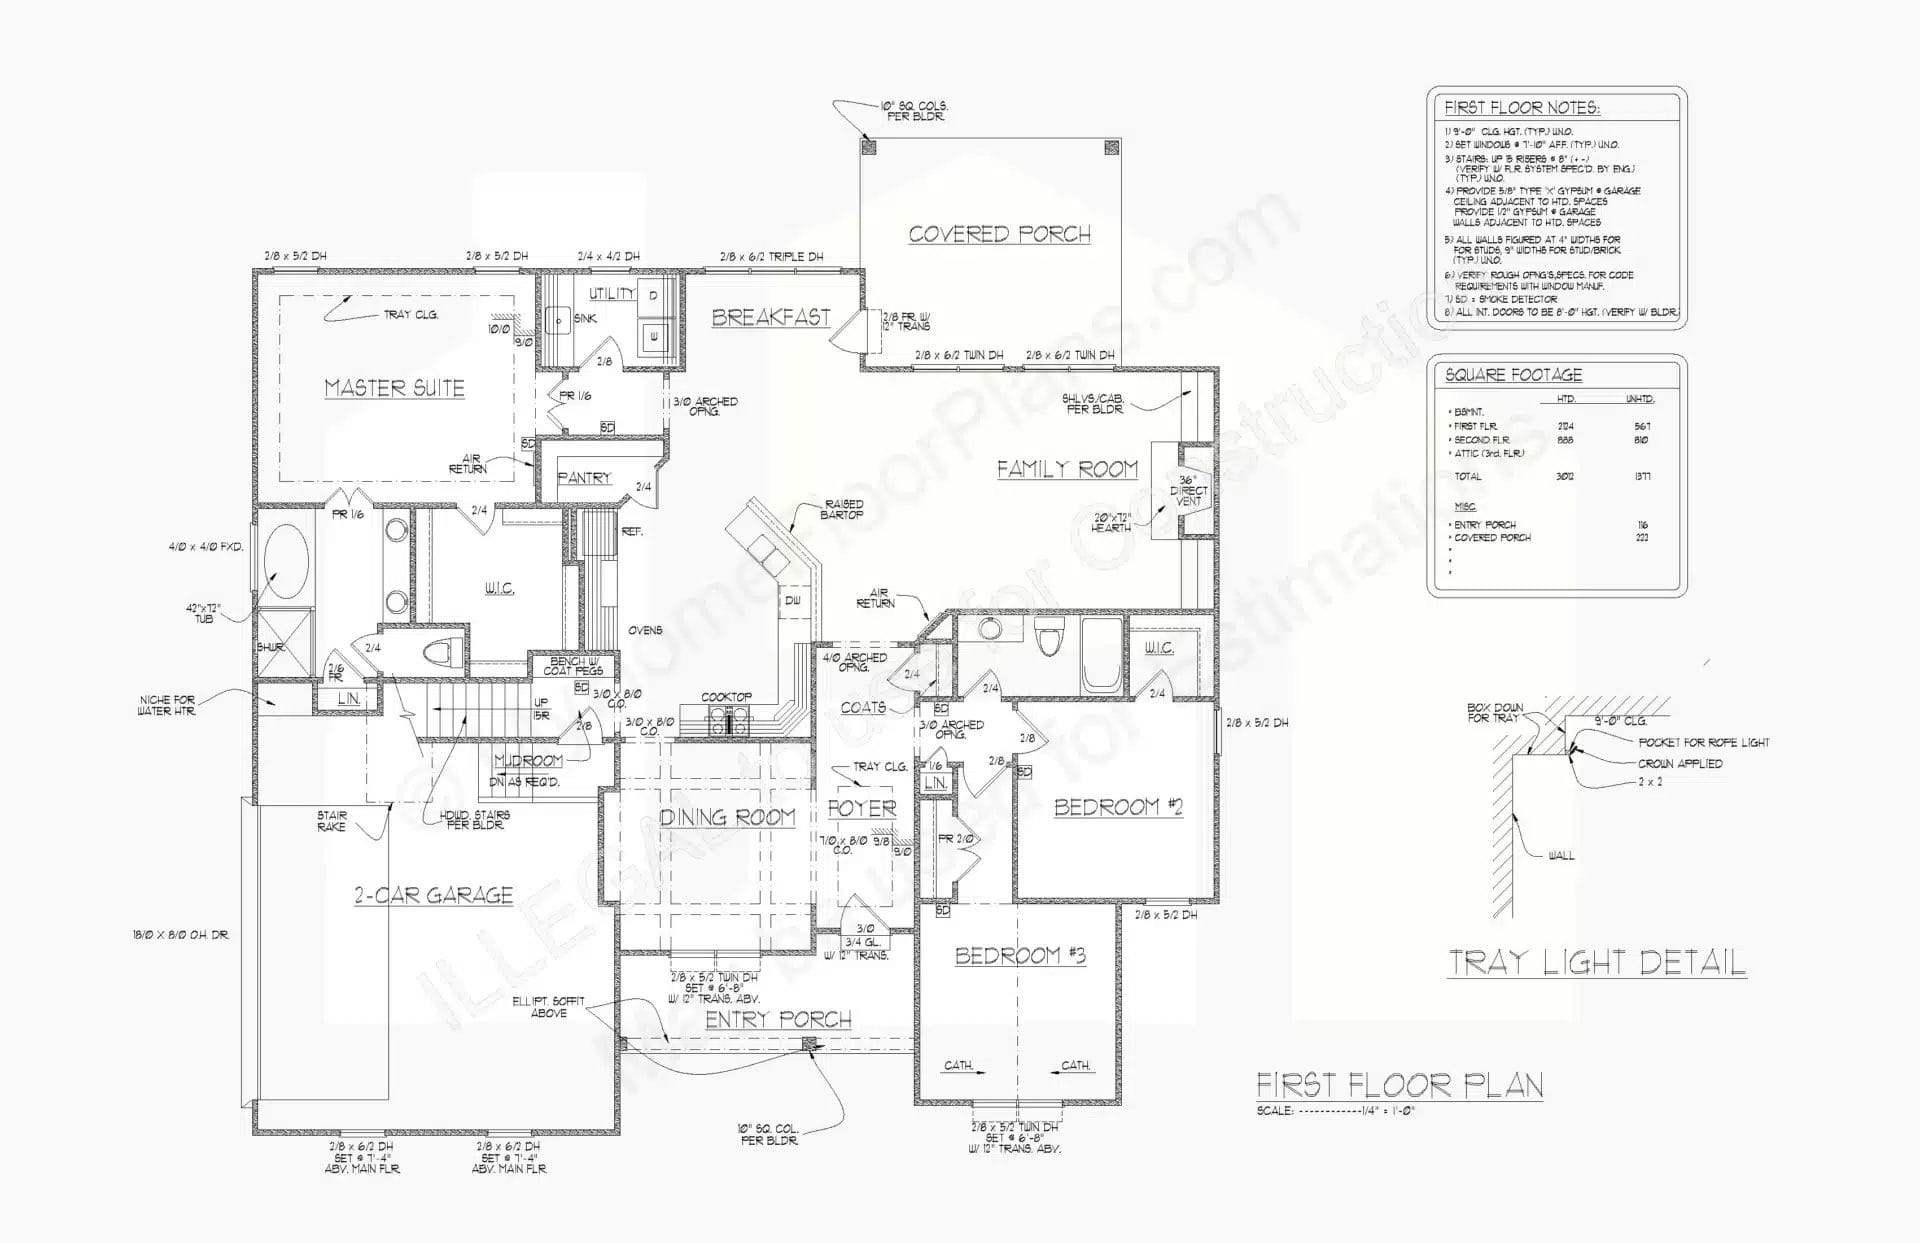 This is a detailed architectural floor plan of a first-floor home layout, featuring labeled rooms including a family room, dining room, kitchen, three bedrooms, and associated details such as porch areas and a garage for the 13-1721.